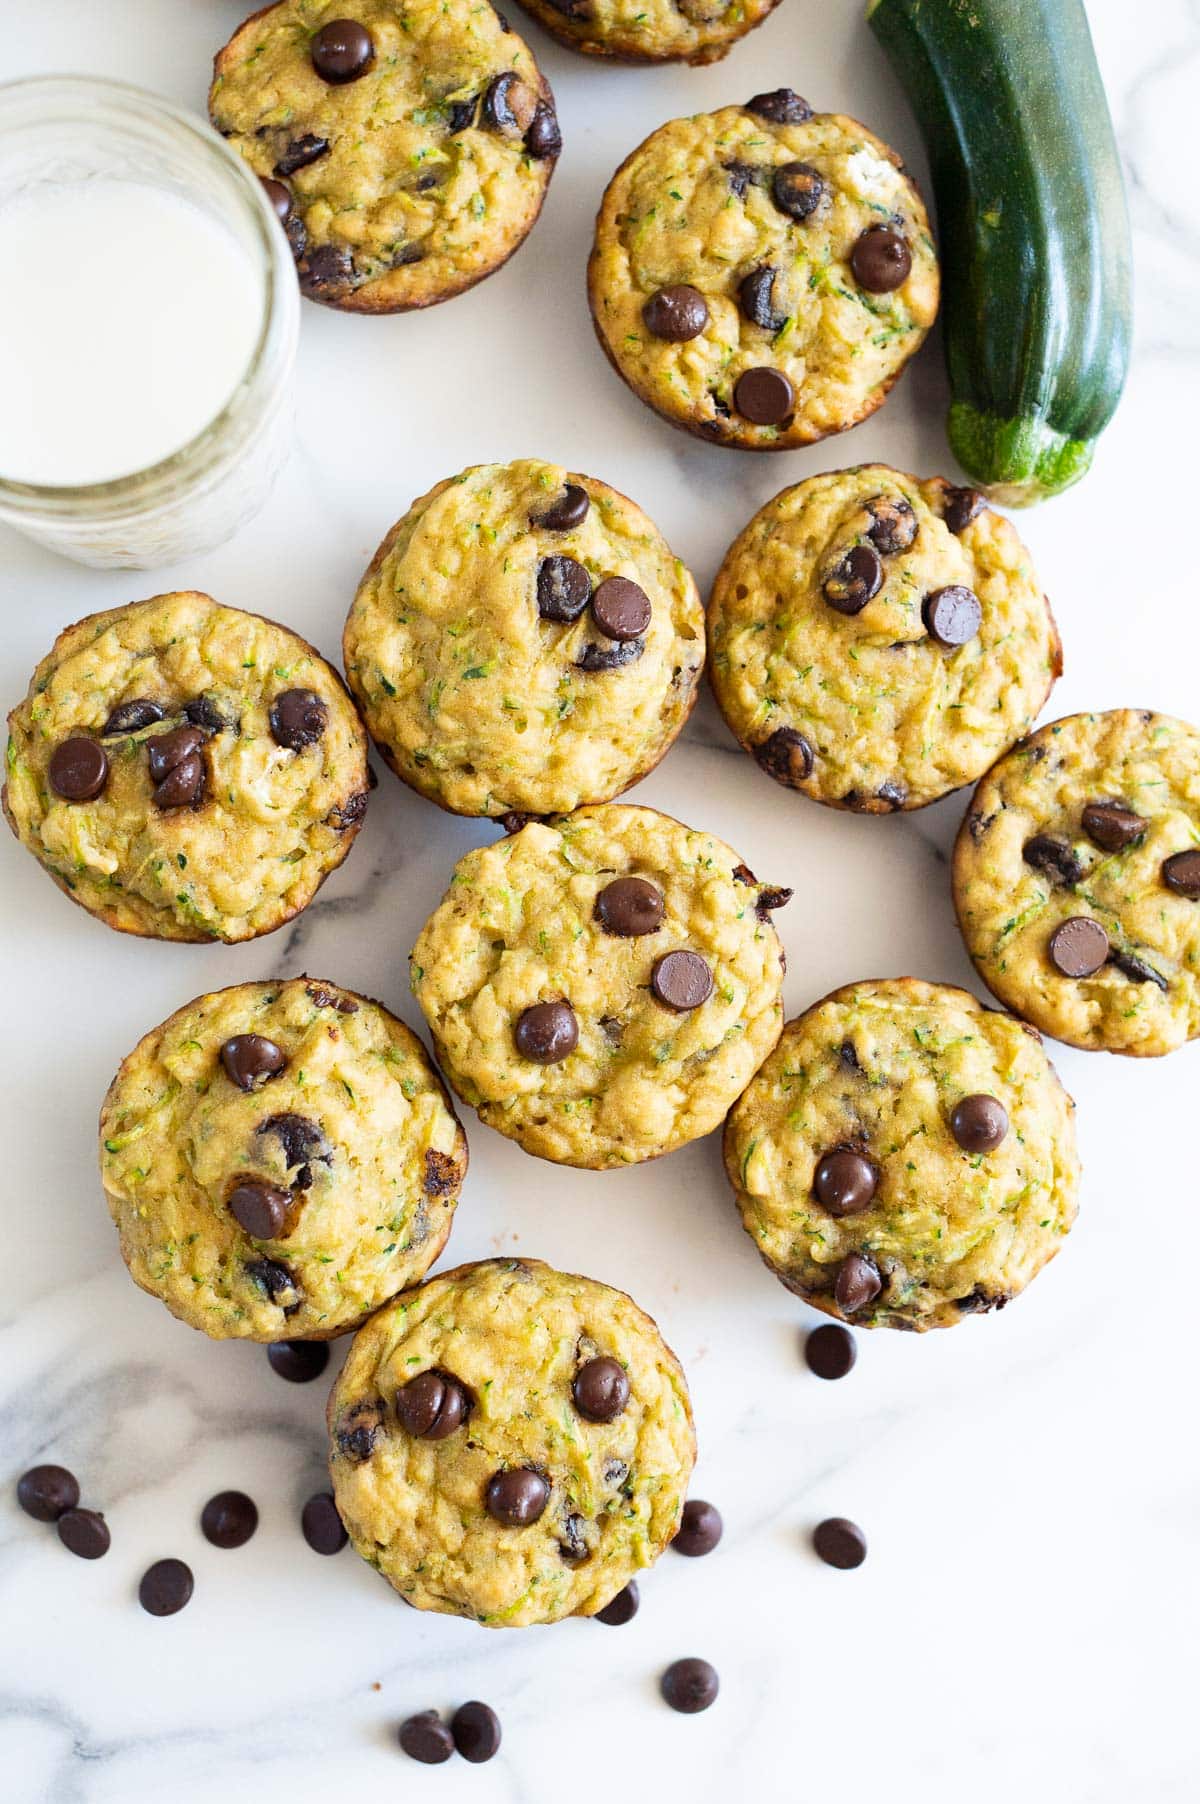 Looking down on zucchini chocolate chip muffins, glass of milk and zucchini.